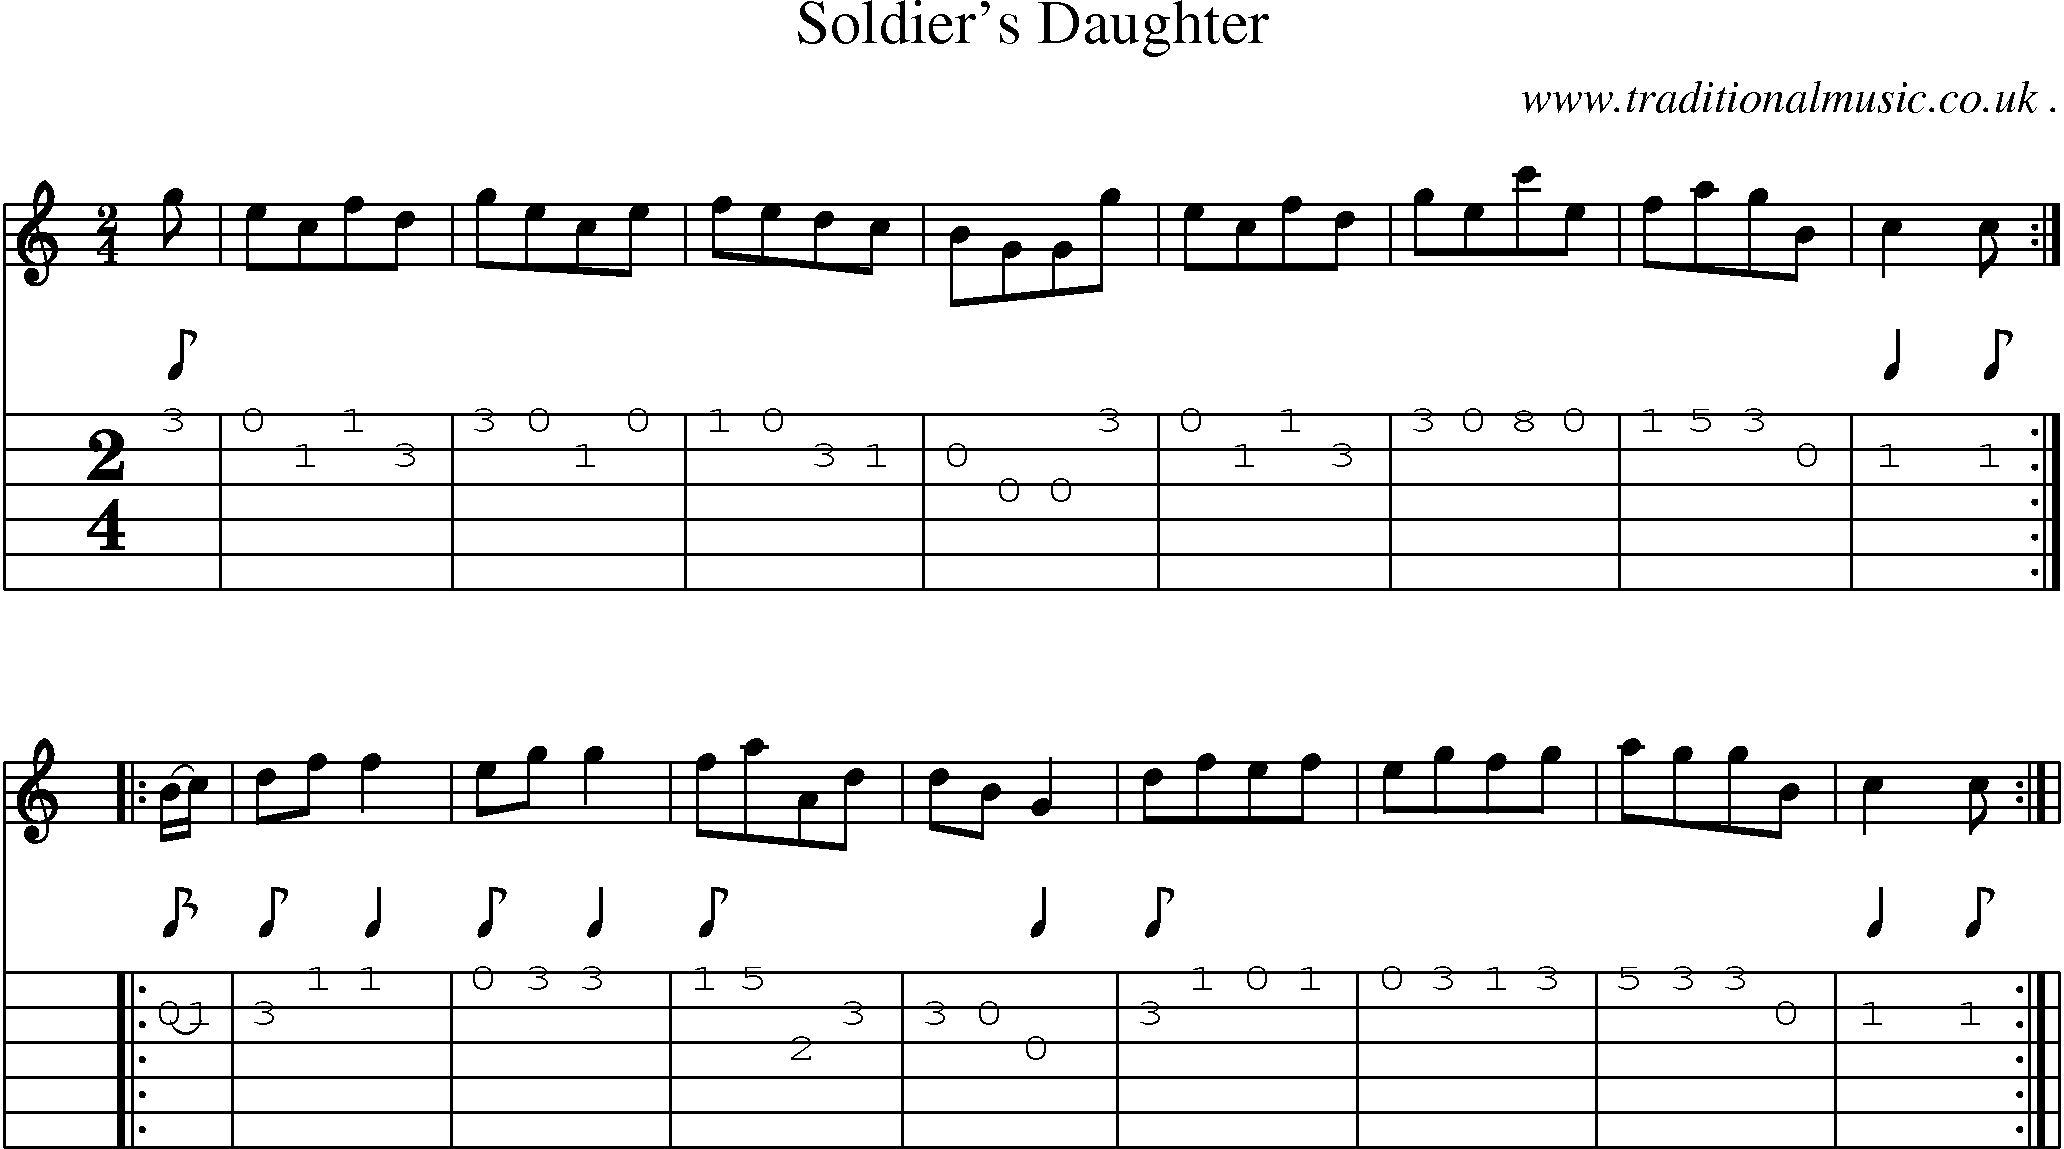 Sheet-Music and Guitar Tabs for Soldiers Daughter